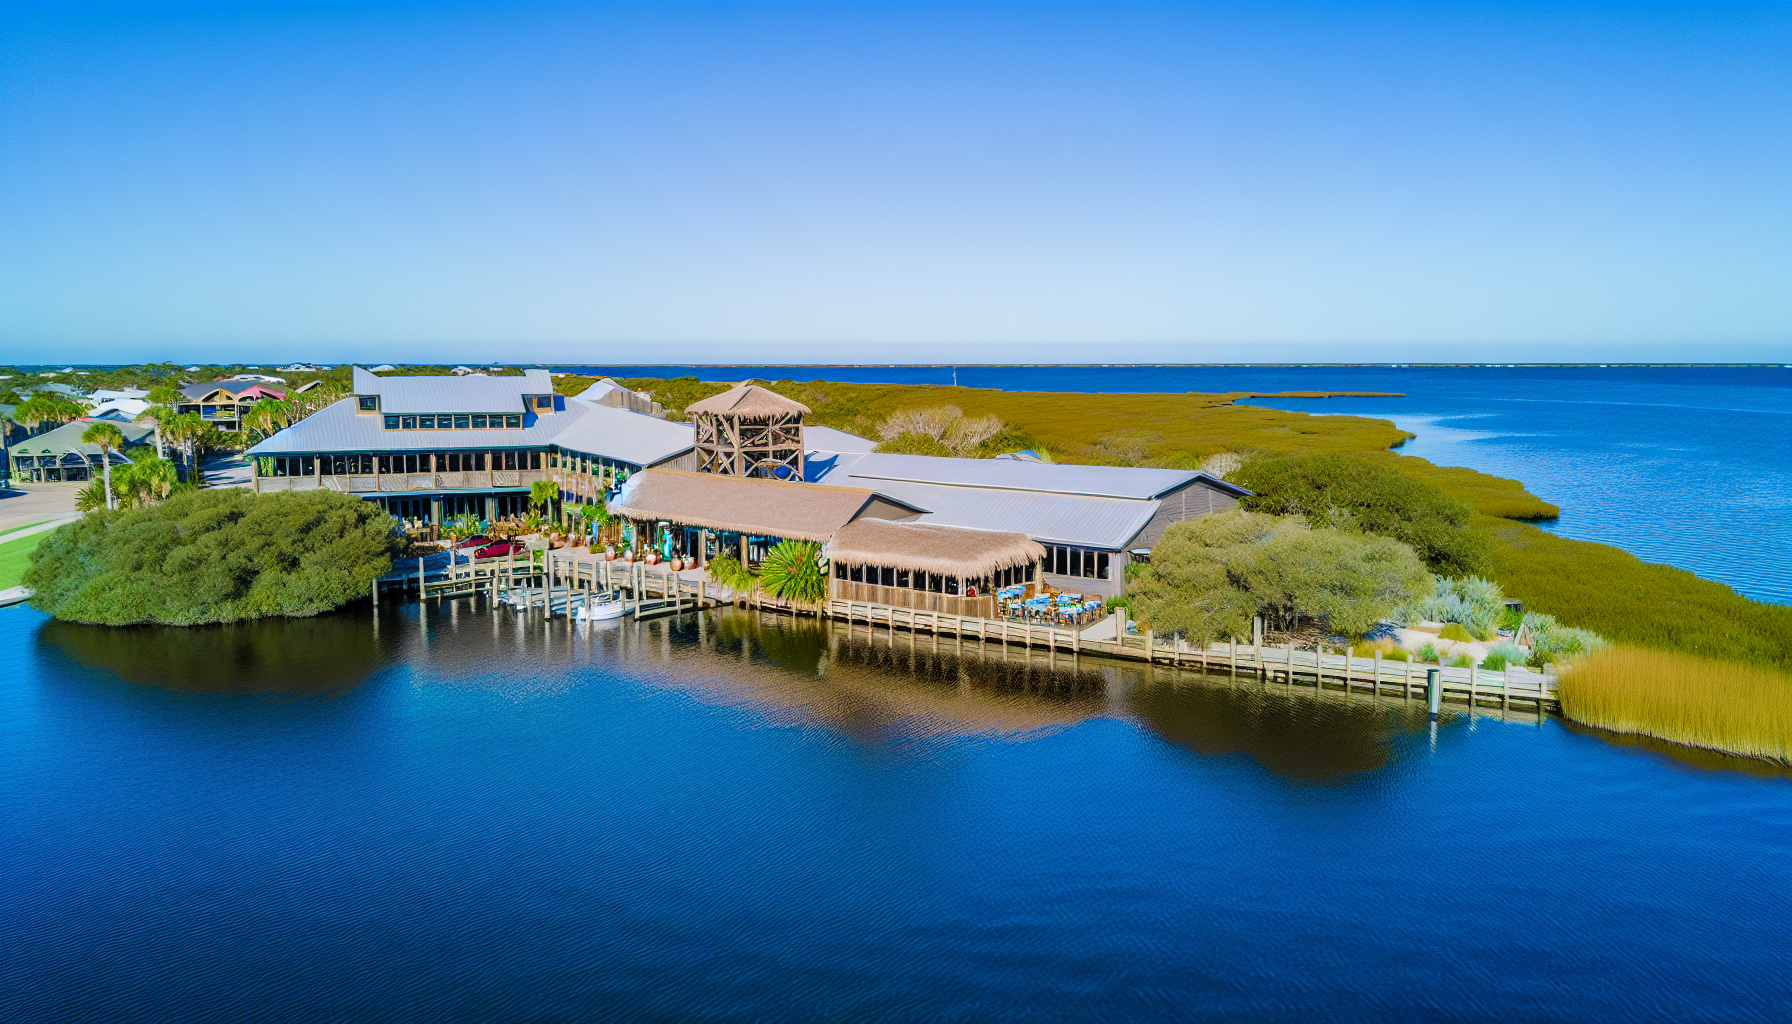 Aerial view of Pelican Landing restaurant on the waterfront